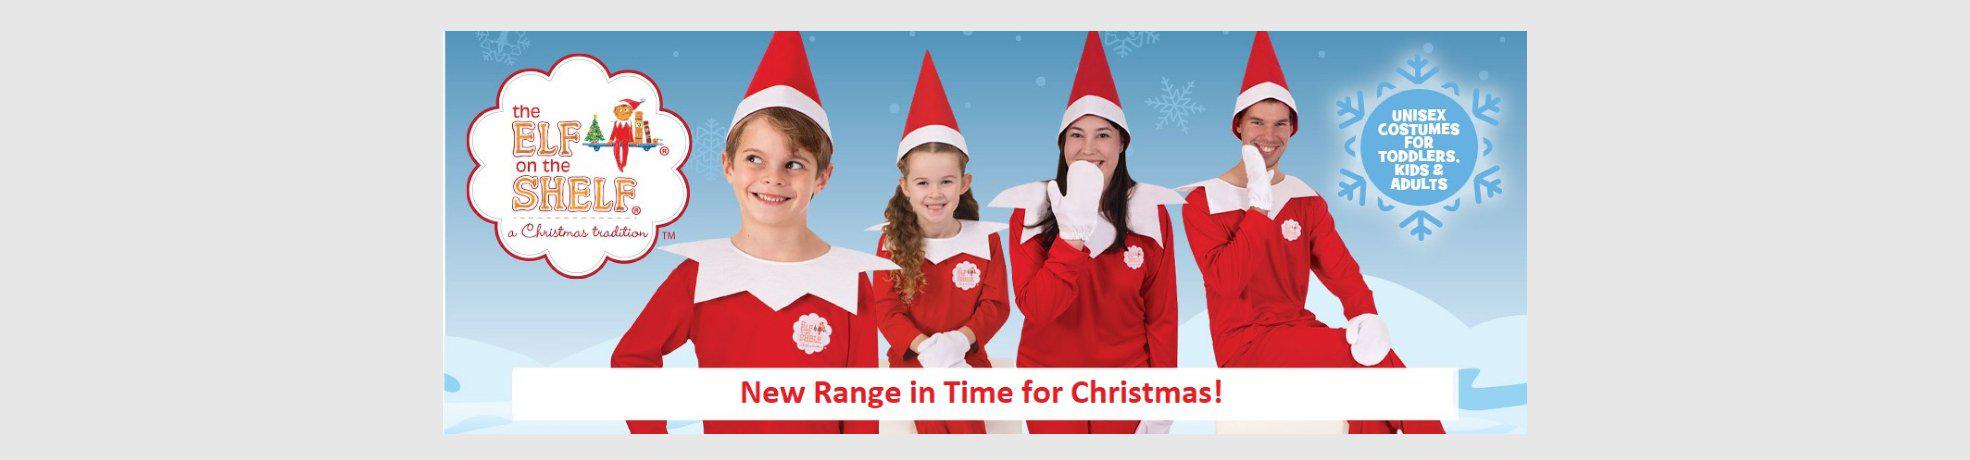 Celebrate Christmas in style with our festive Santa, Elf and Gingerbread Man costumes.